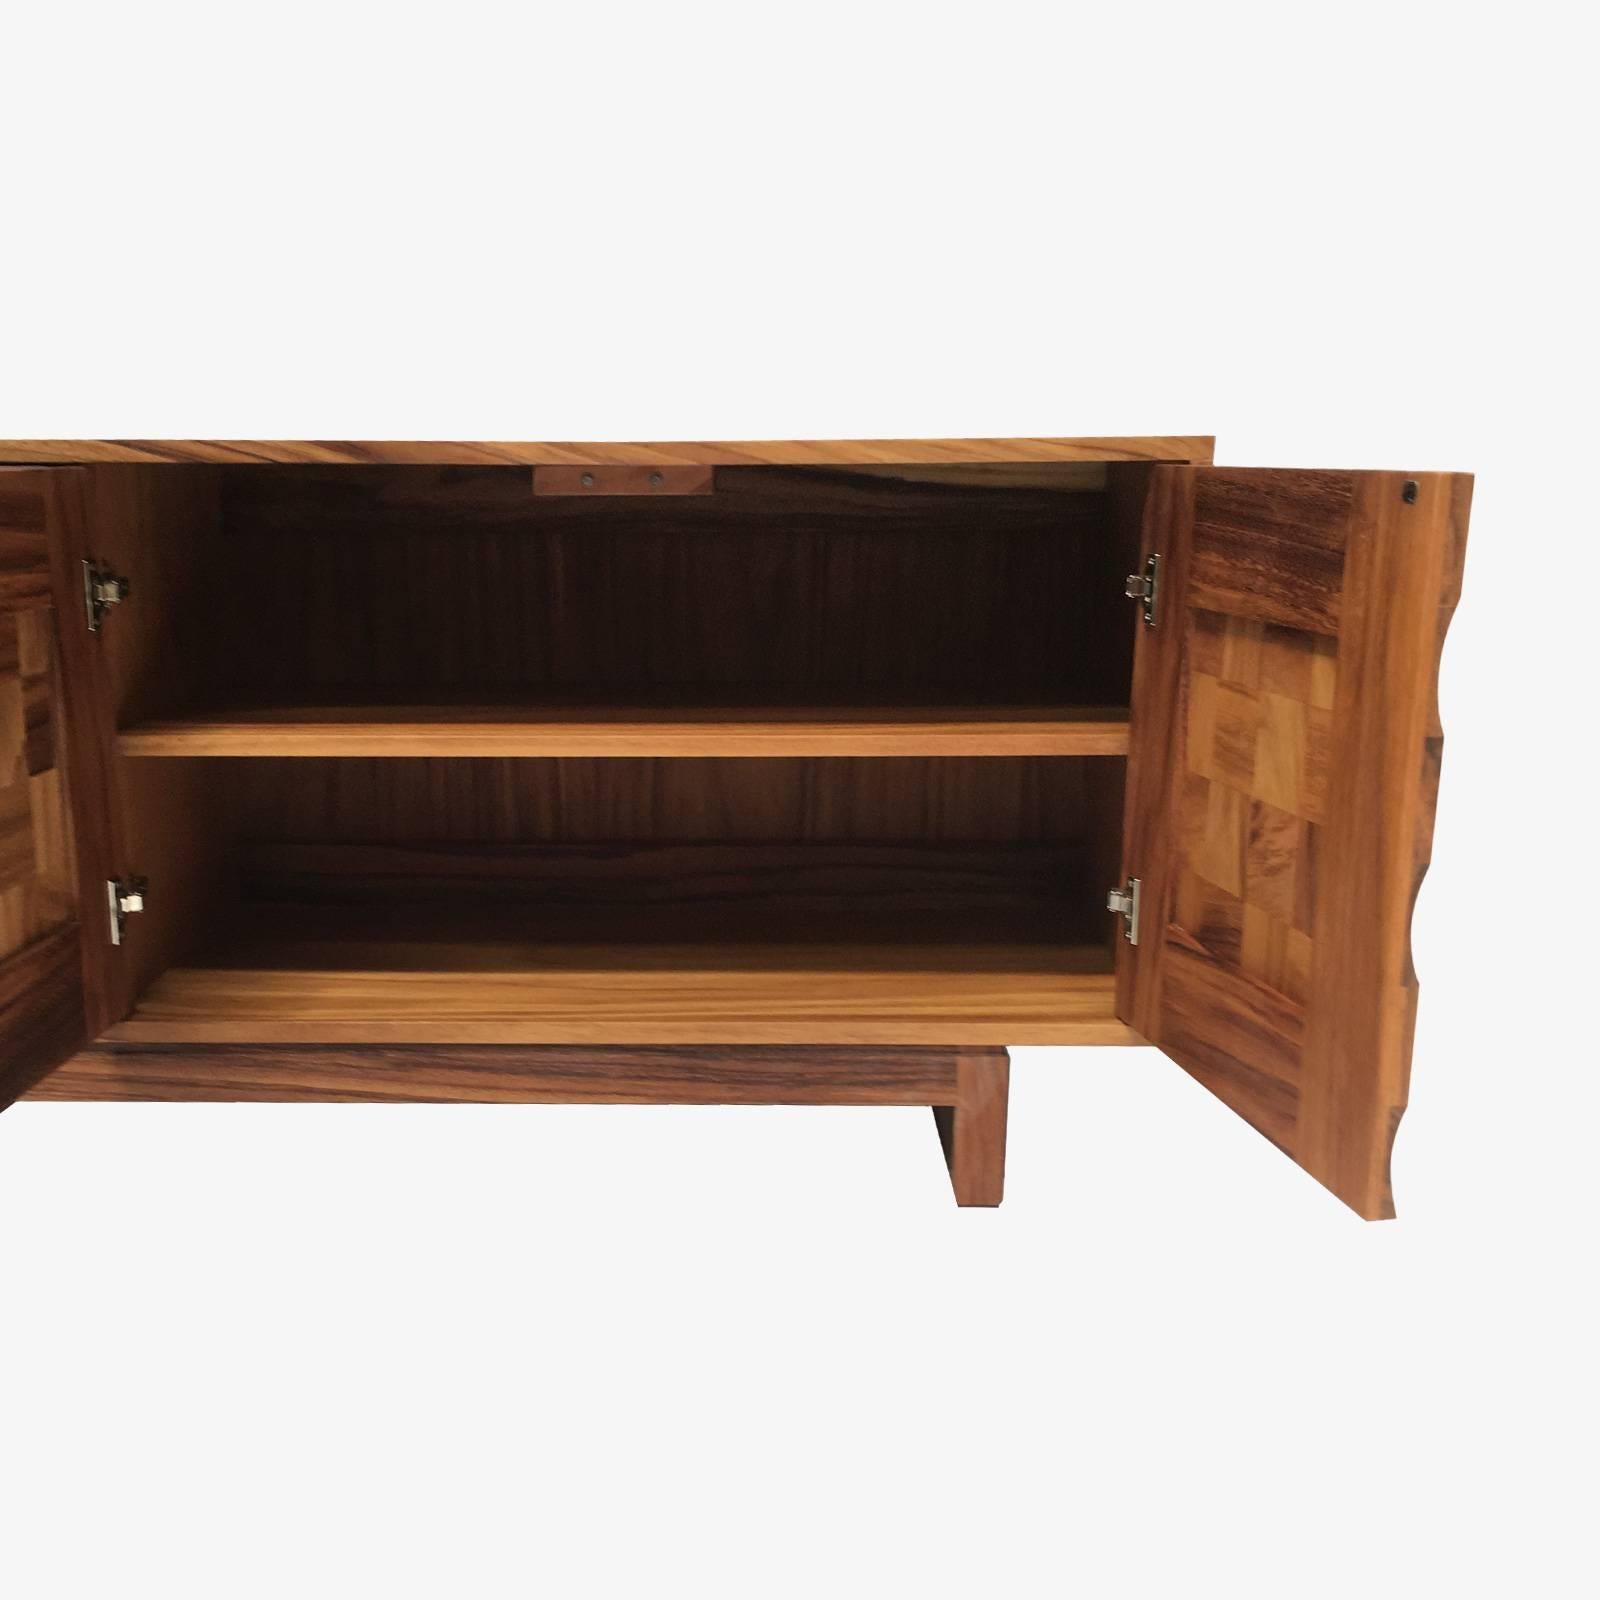 Hand-Crafted Handcrafted Guanacaste Credenza For Sale